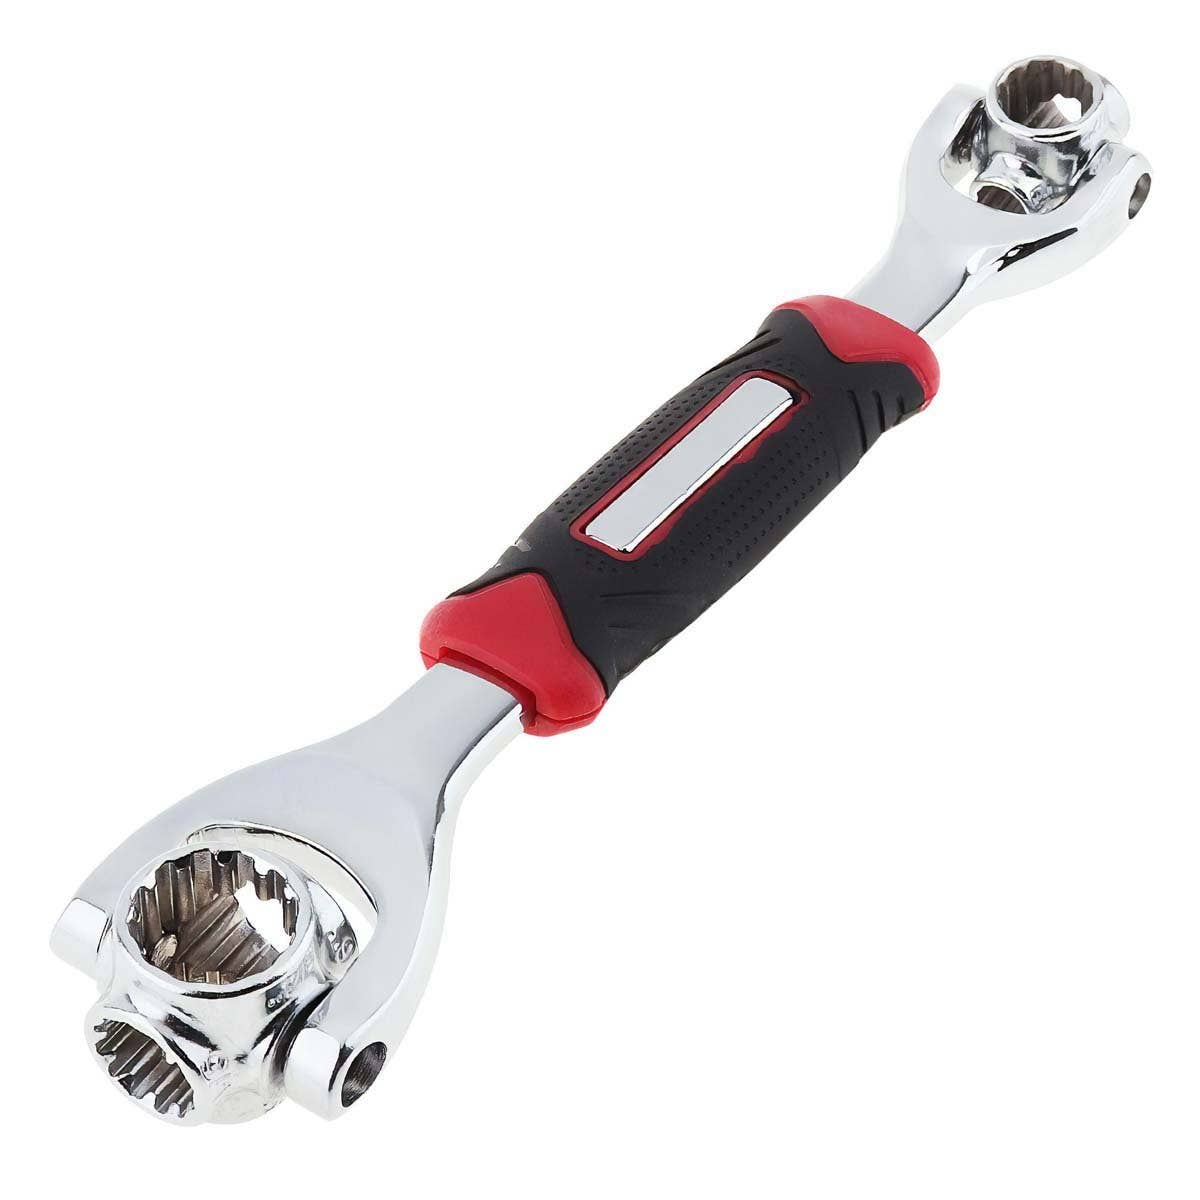 Mad Man - 48 in 1 Universal Wrench